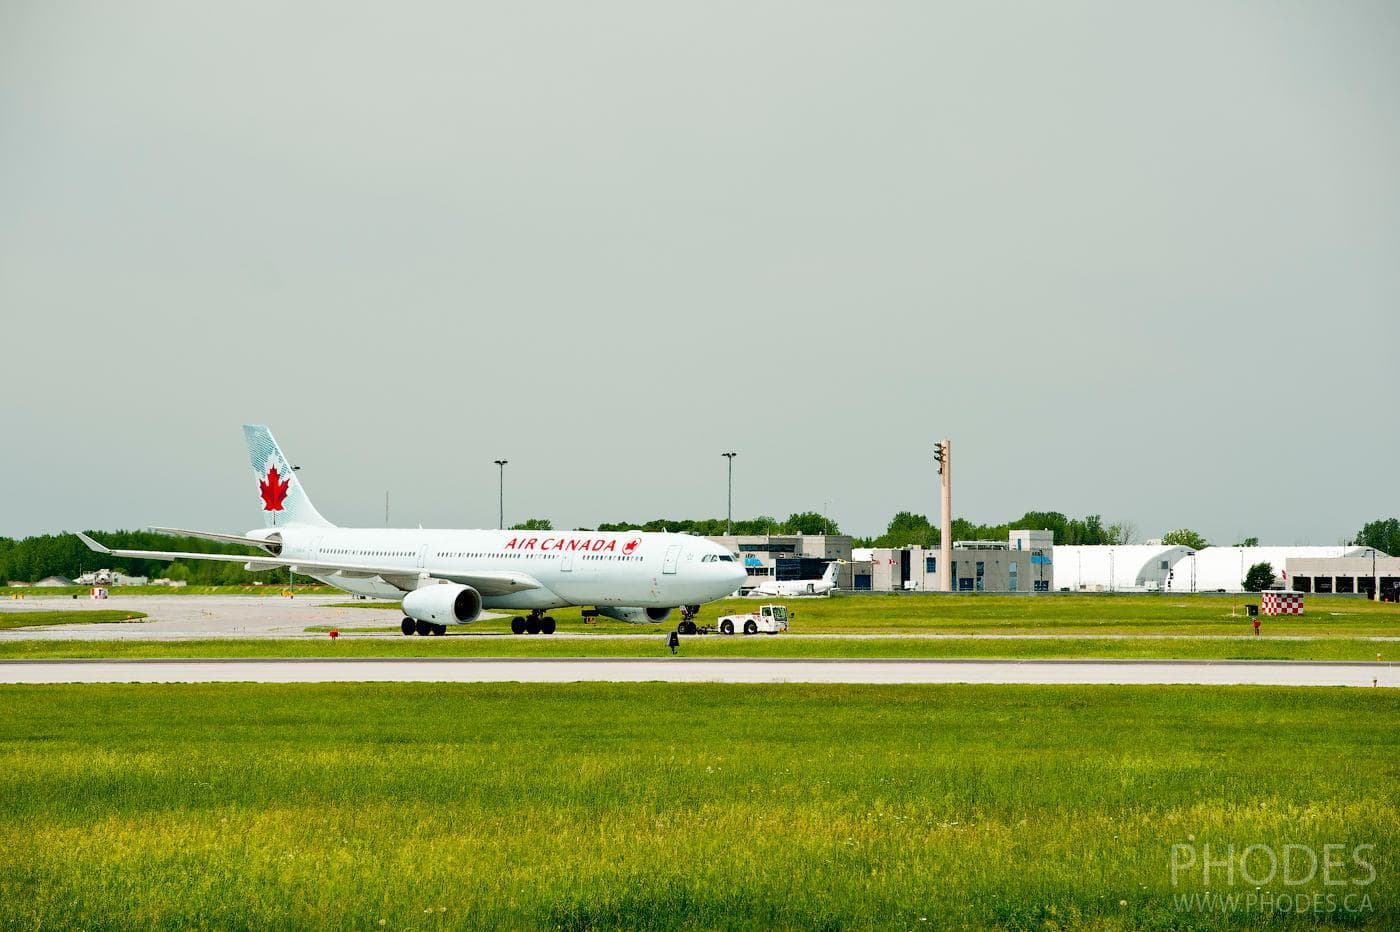 Air Canada plane before taking off - Airport Montreal Trudeau